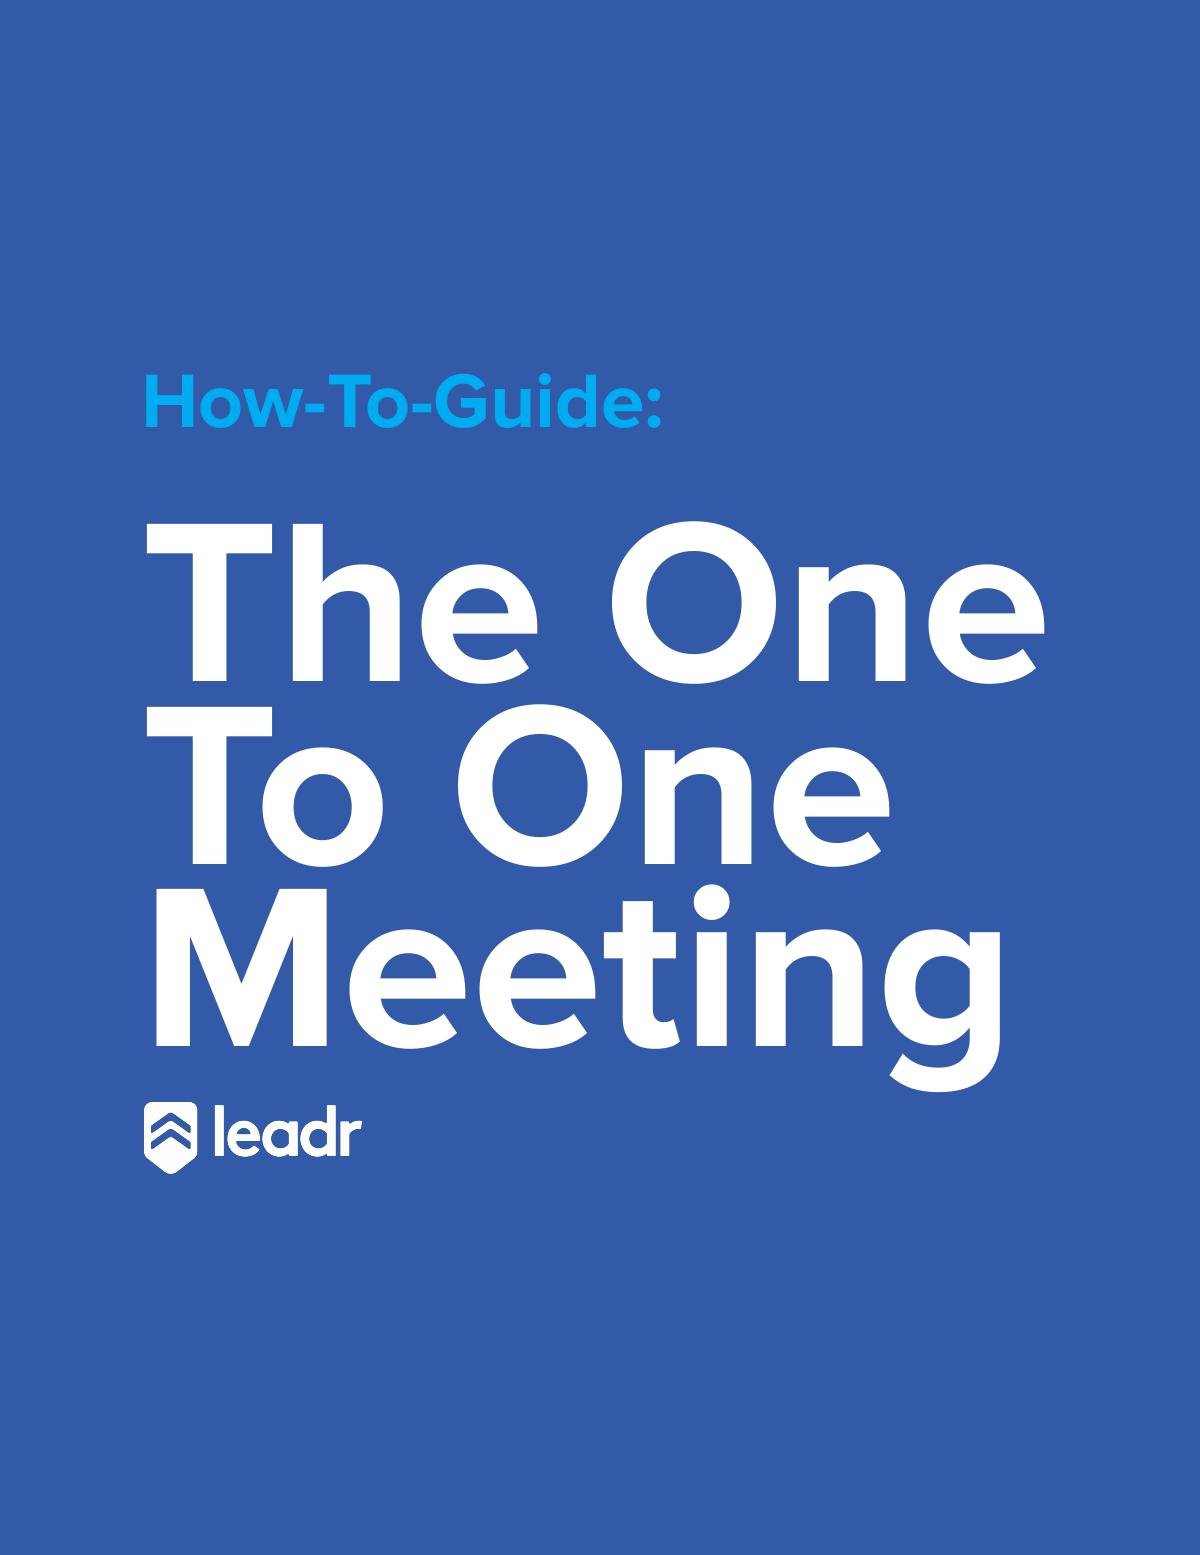 How-To-Guide:  The One to One Meeting